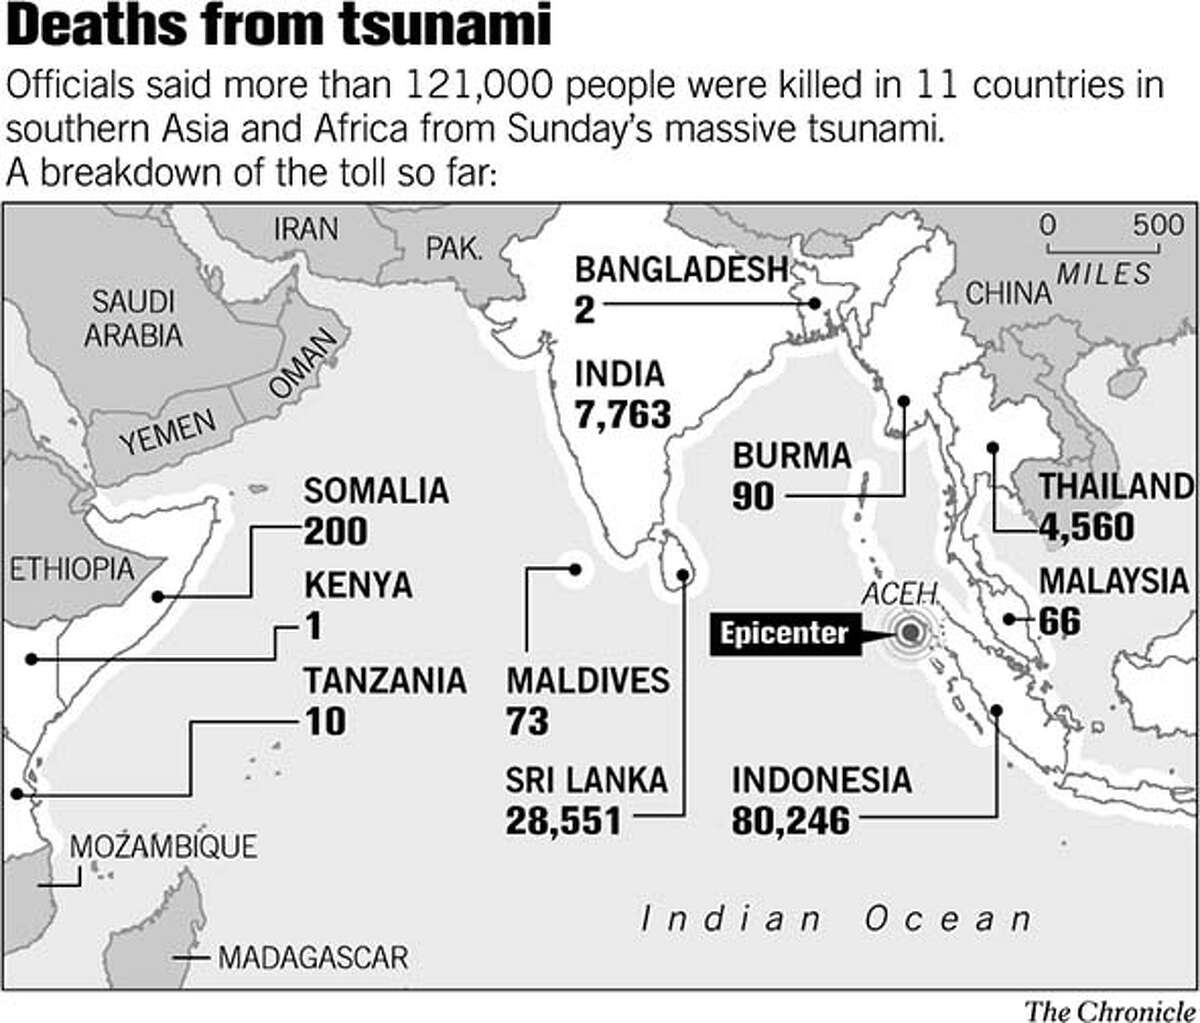 Deaths from Tsunami. Chronicle Graphic